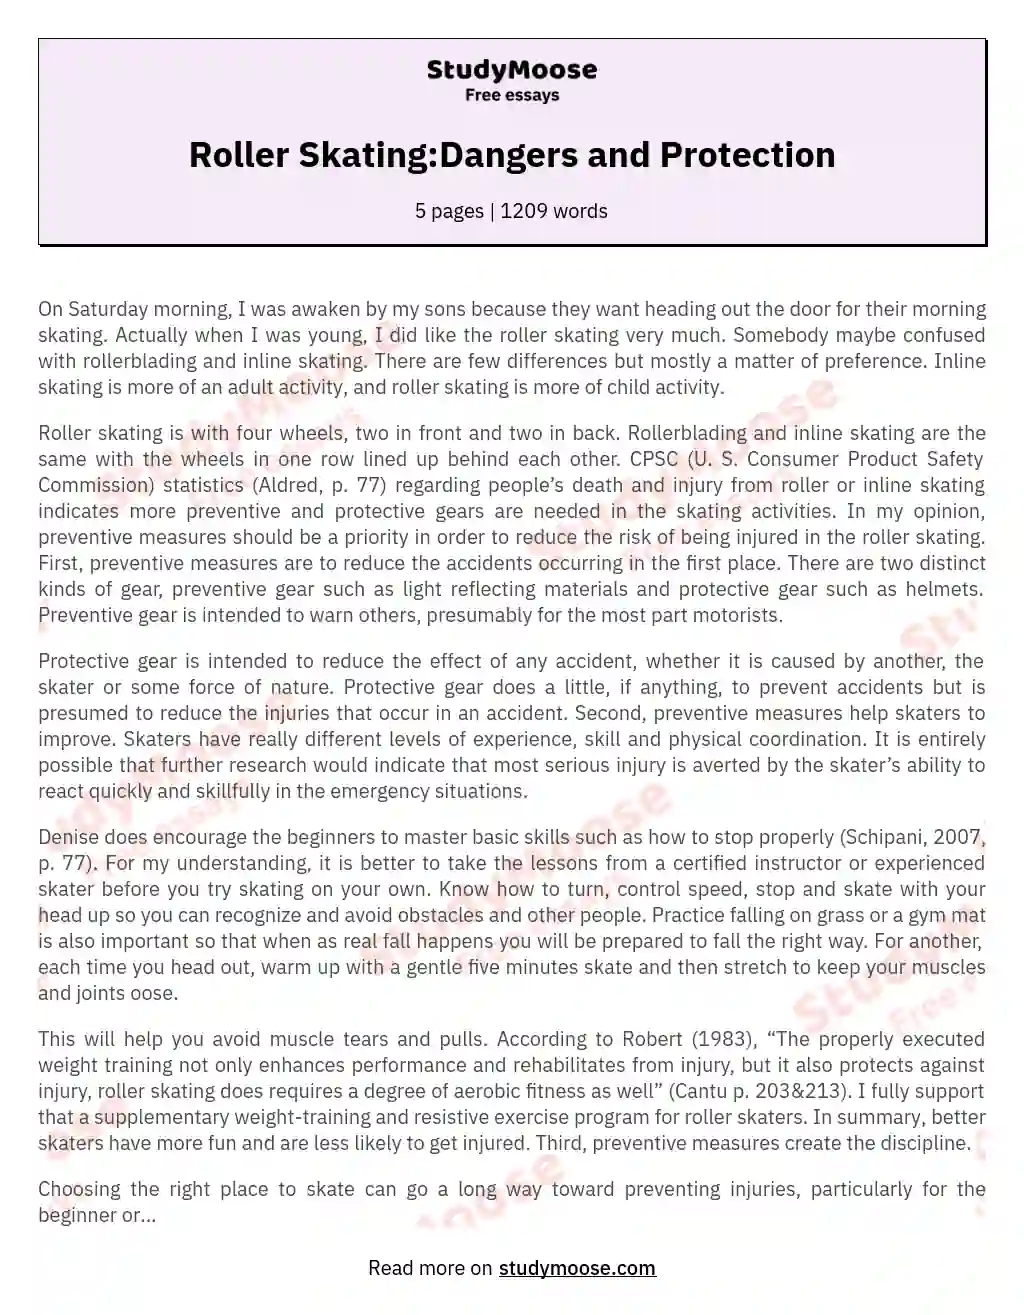 Roller Skating:Dangers and Protection essay